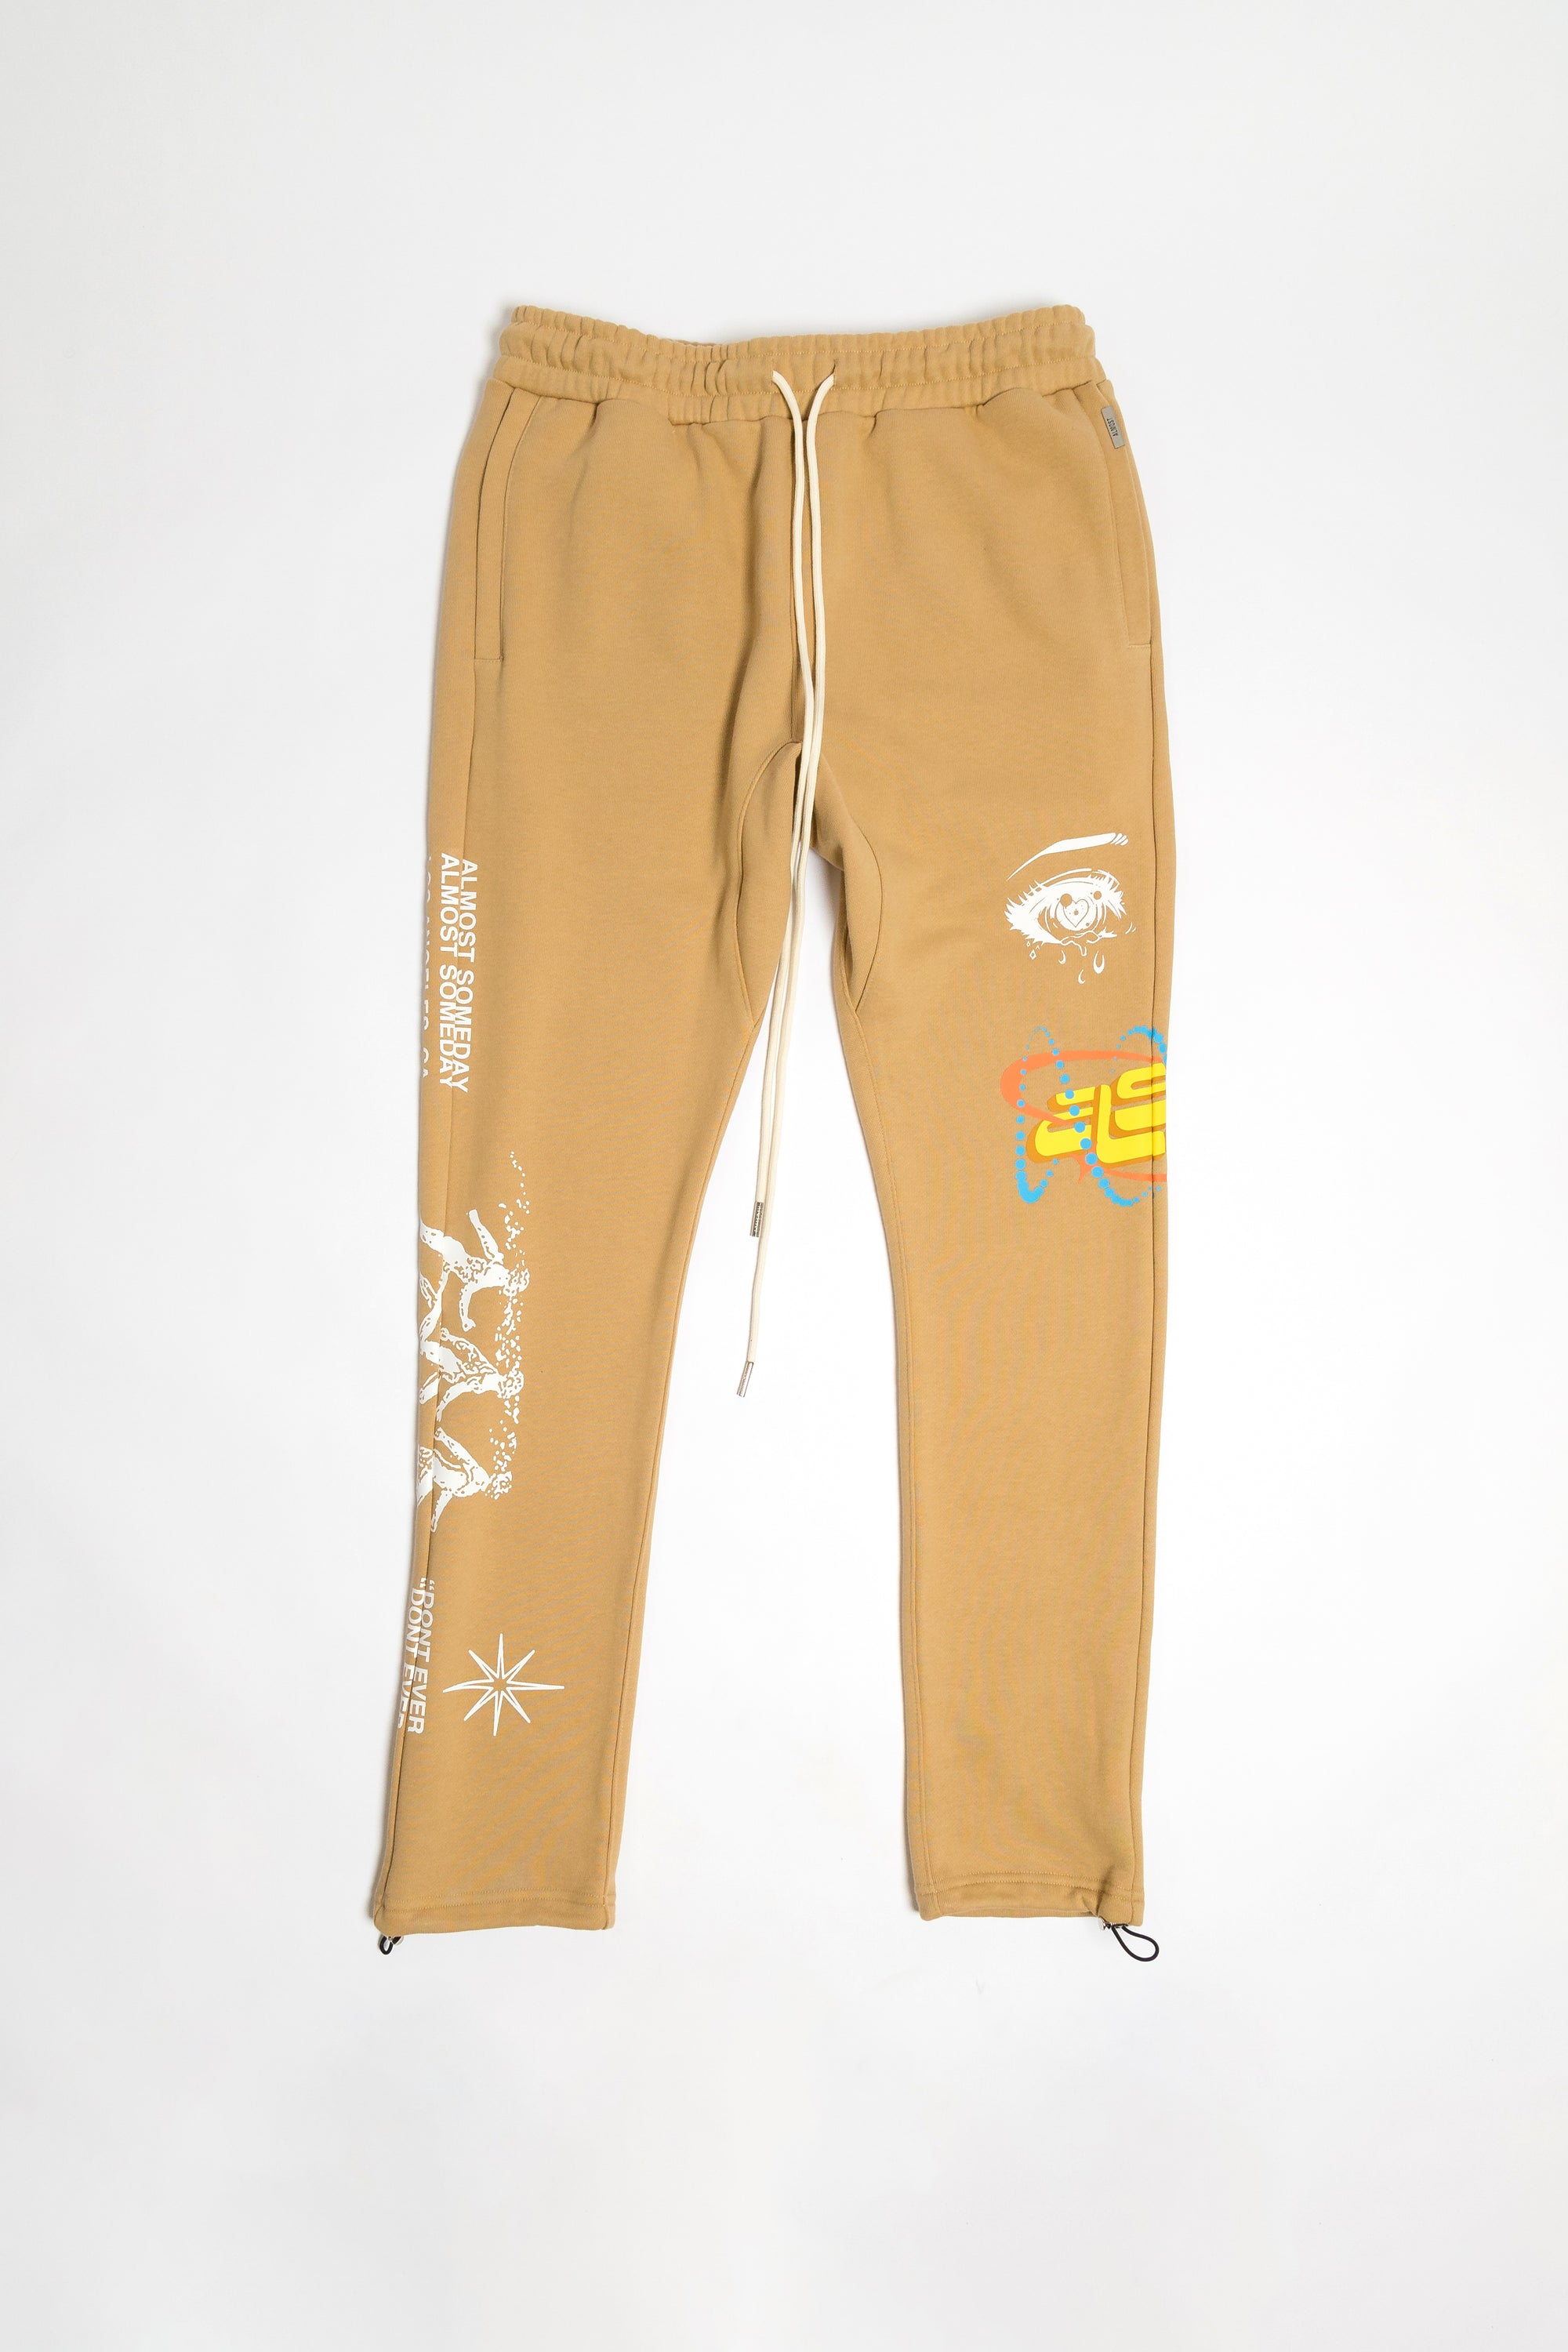 Heroes Sweatpant (Sand) - ALMOST SOMEDAY